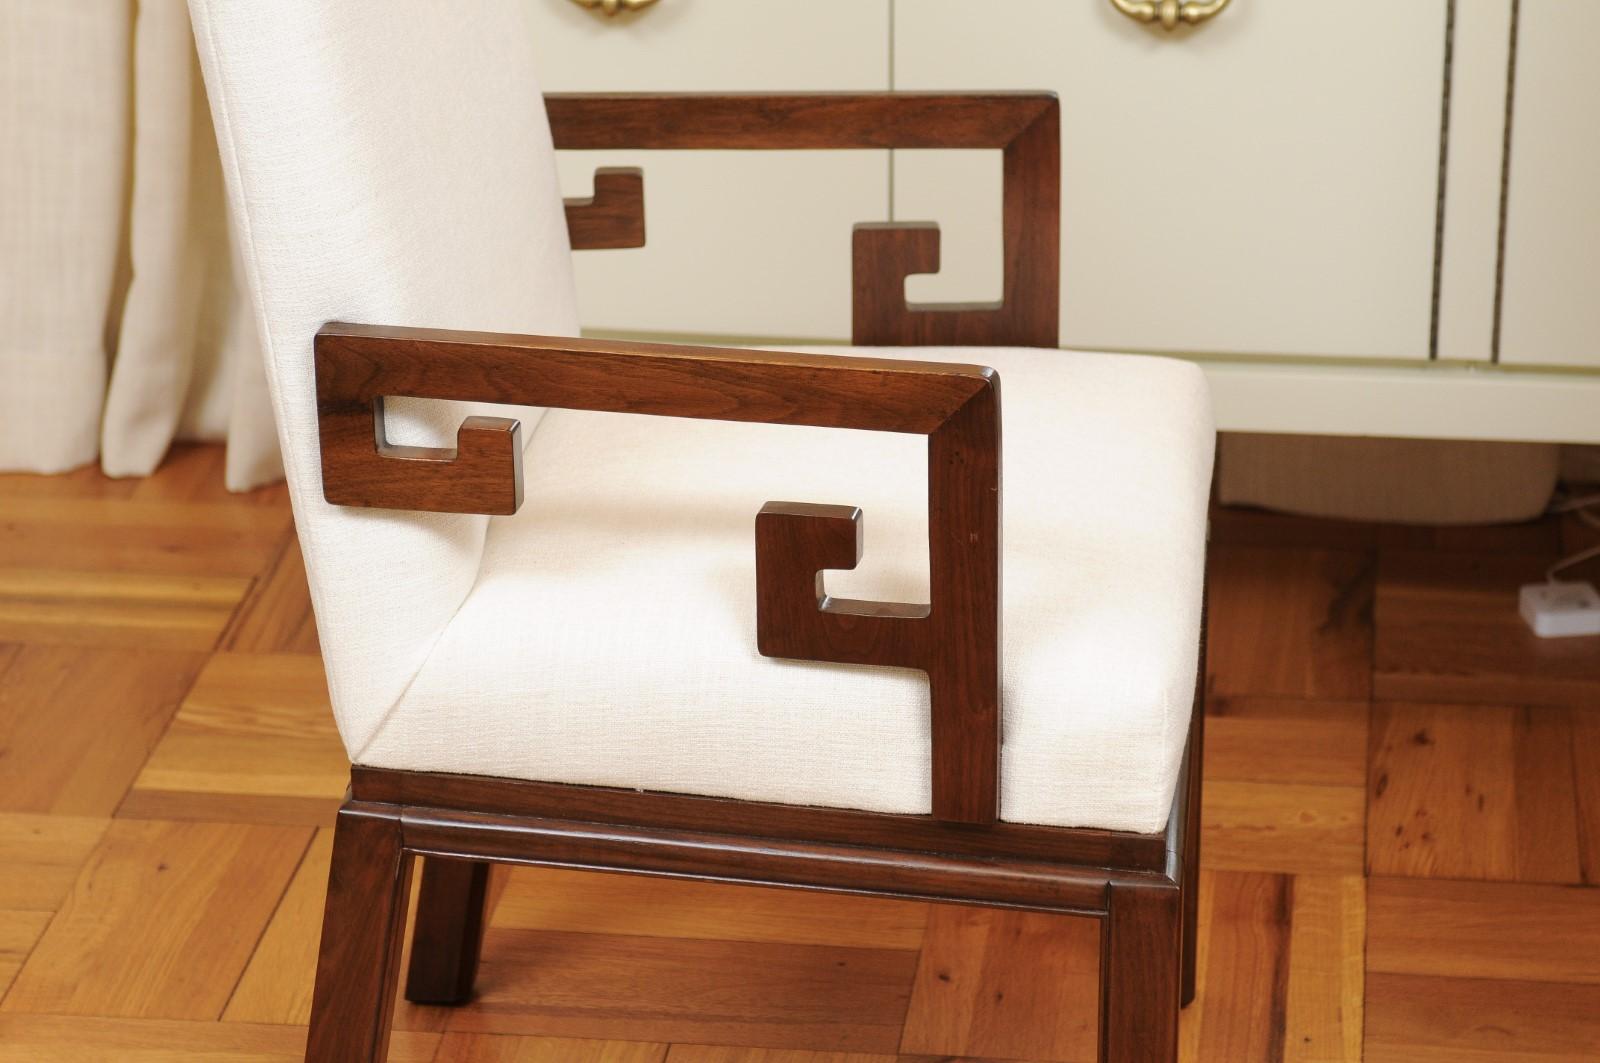 All Arms, Sublime Set of 20 Greek Key Chairs by Michael Taylor, circa 1970 For Sale 8